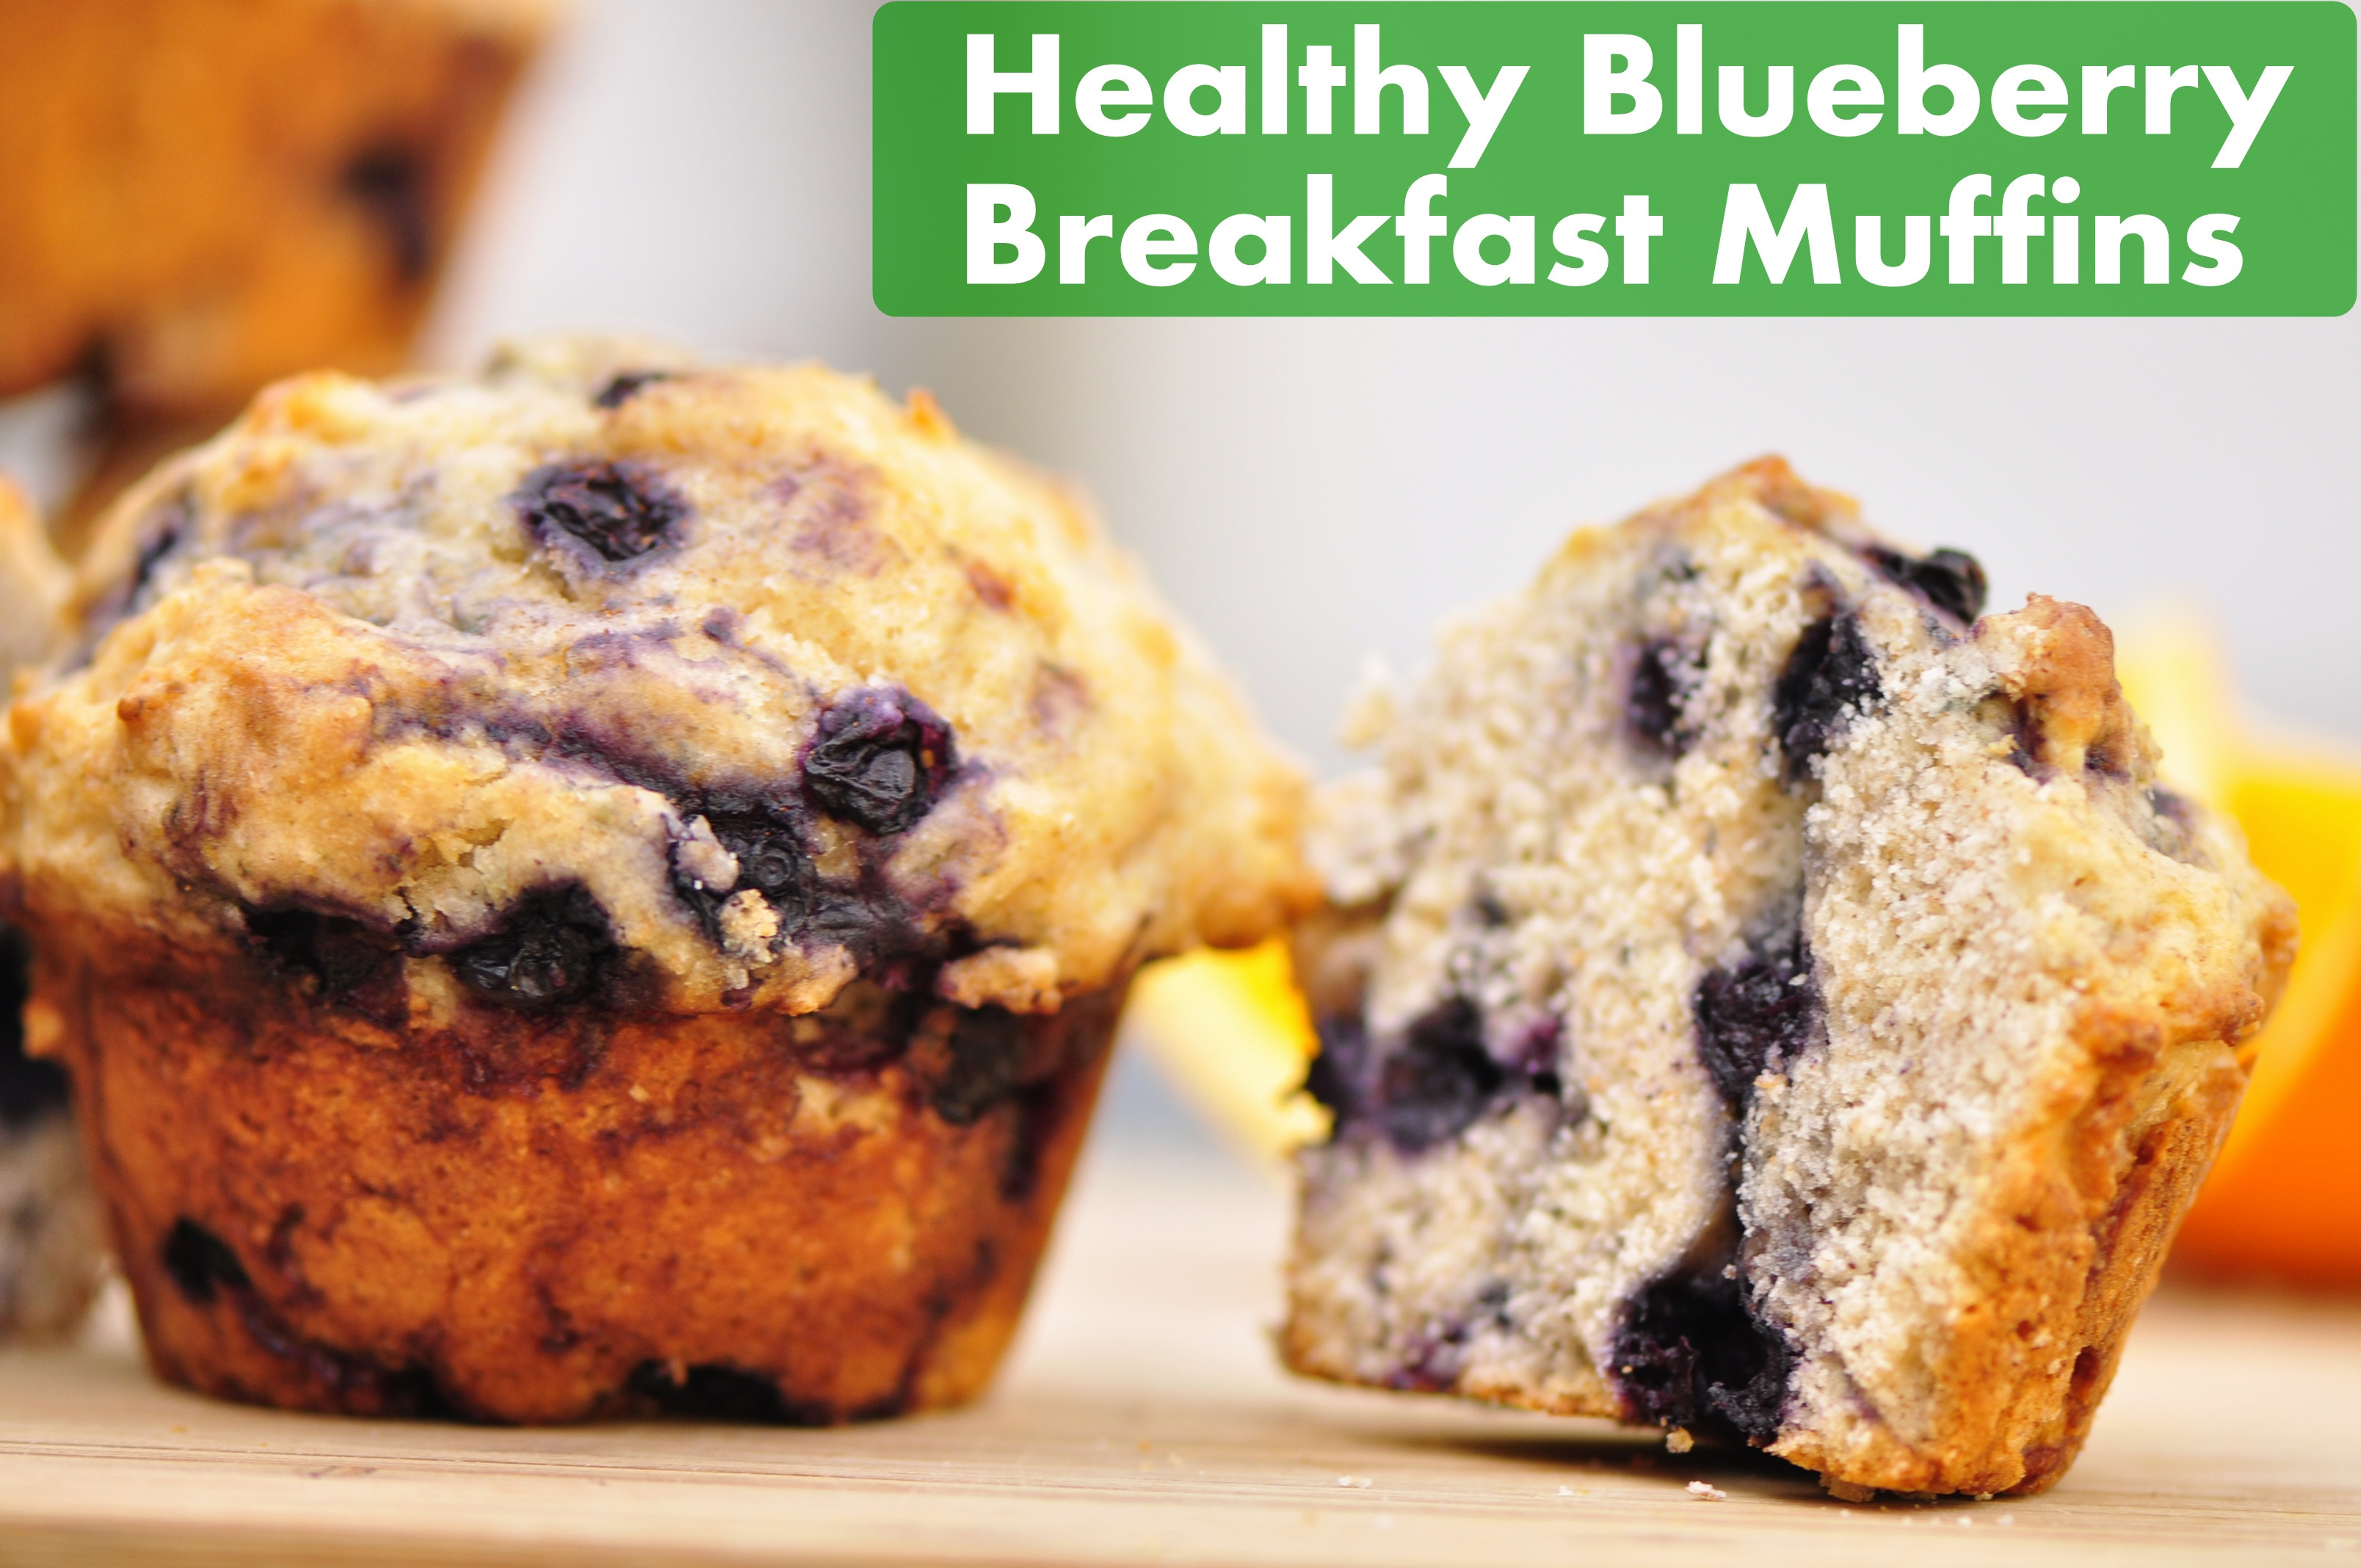 Breakfast Muffins Healthy
 Healthy Blueberry Breakfast Muffins – the ve arian ginger